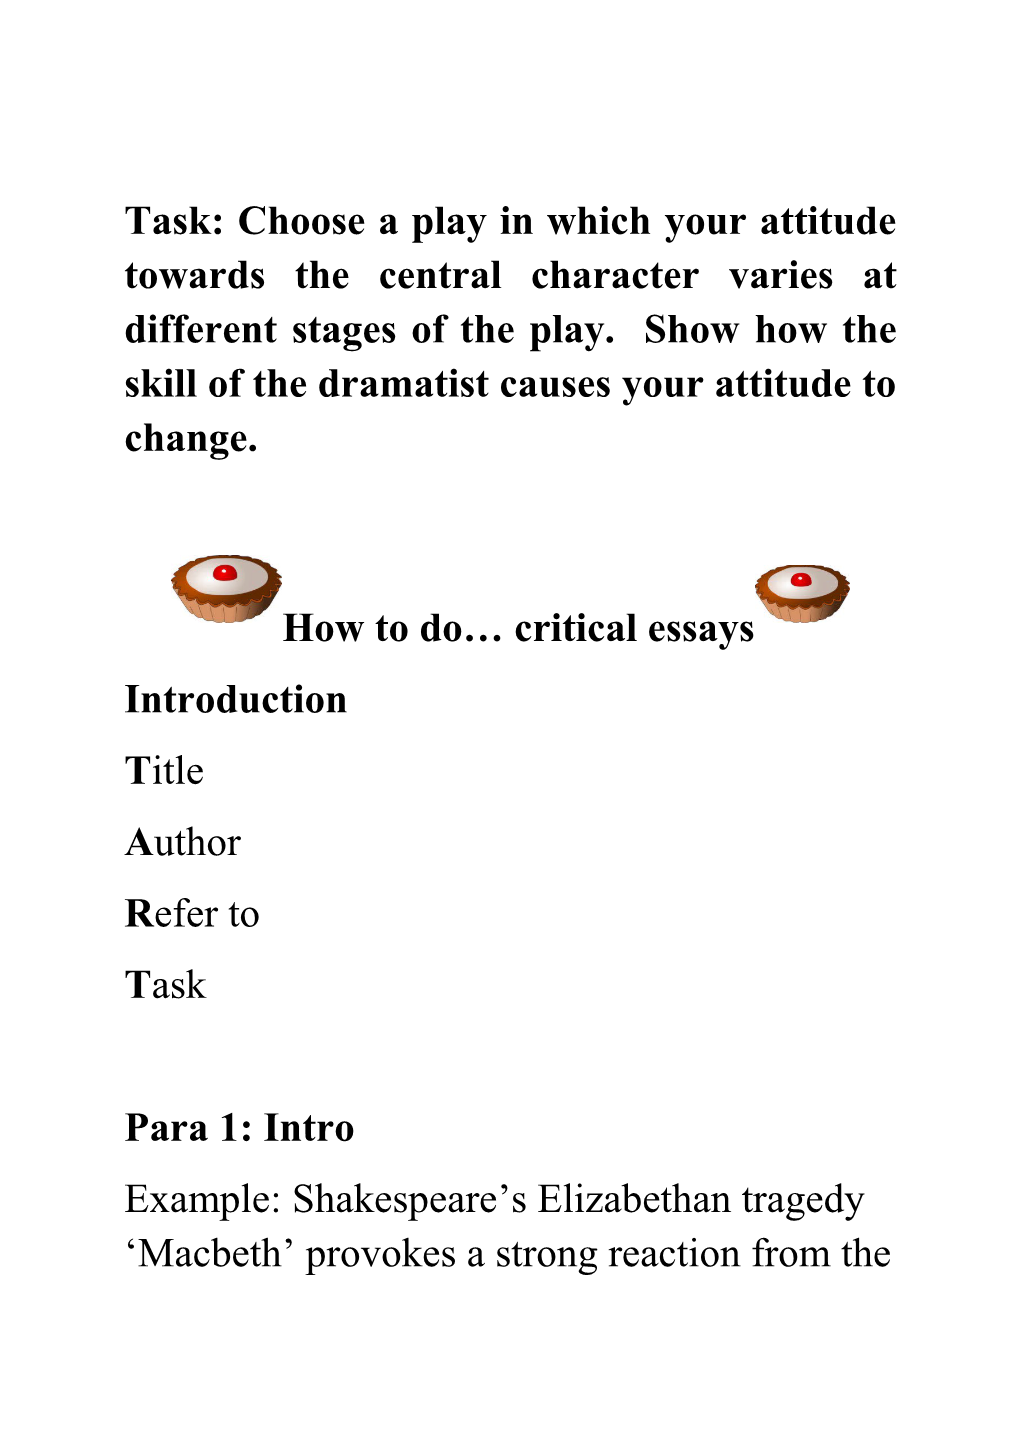 Task: Choose a Play in Which Your Attitude Towards the Central Character Varies at Different